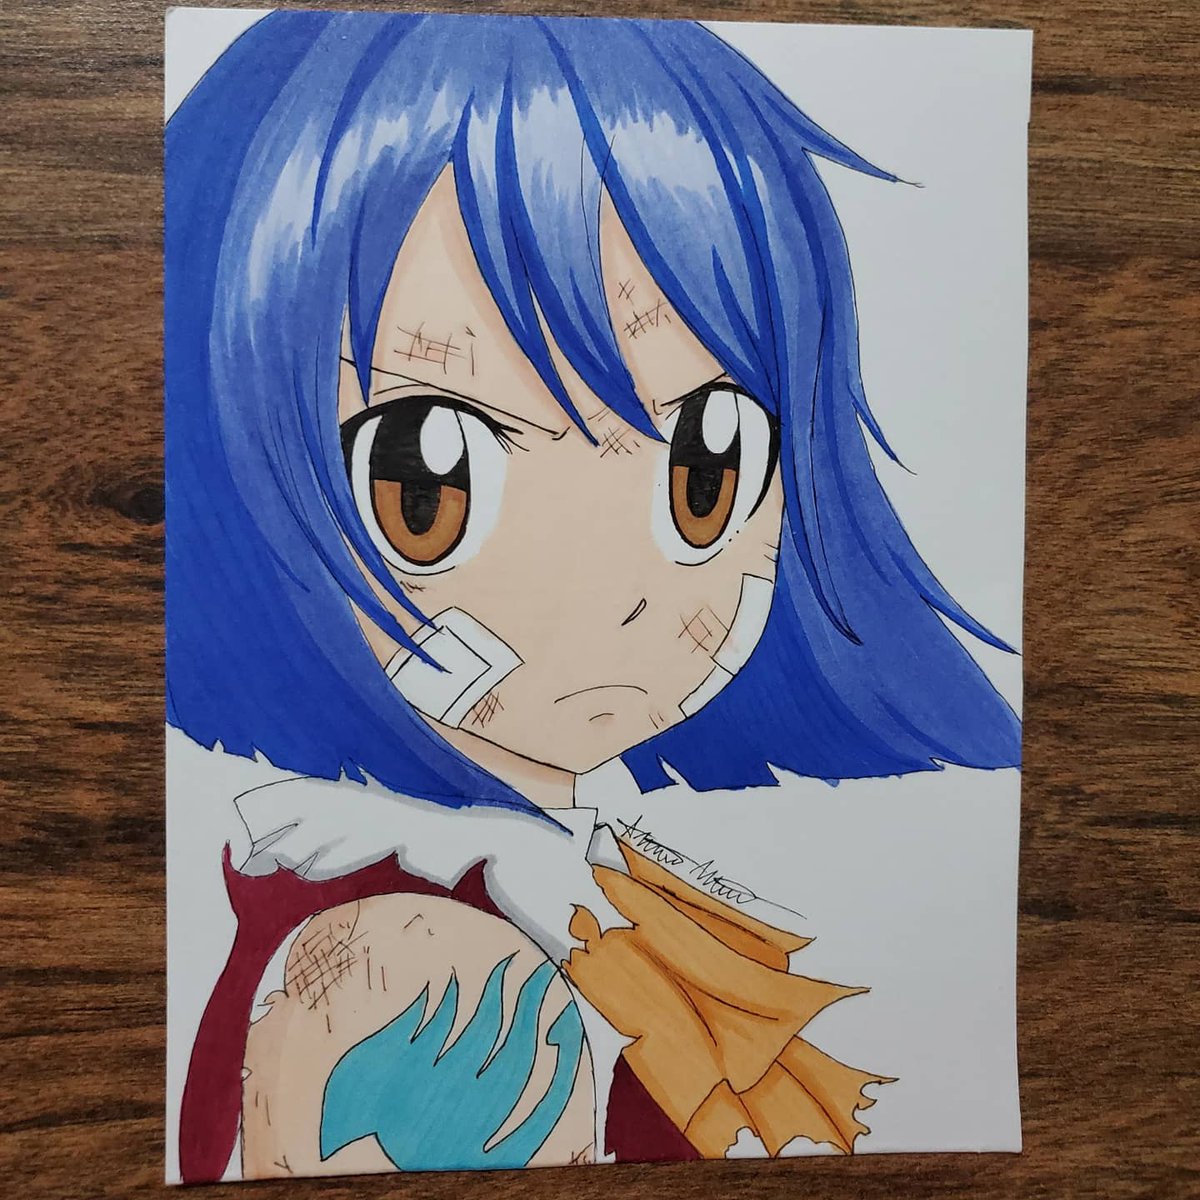 Happy Friday! Its a quick drawing of Wendy from Fairy Tail. I absolutely loved watching Fairy Tail, and can't wait to see more from Hiro Mashima!
#fairytail #fairytailwendy #wendymarvell #fanart #anime #art #artoftheday #drawingoftheday #drawing #copic #artmarkers #copicartwork